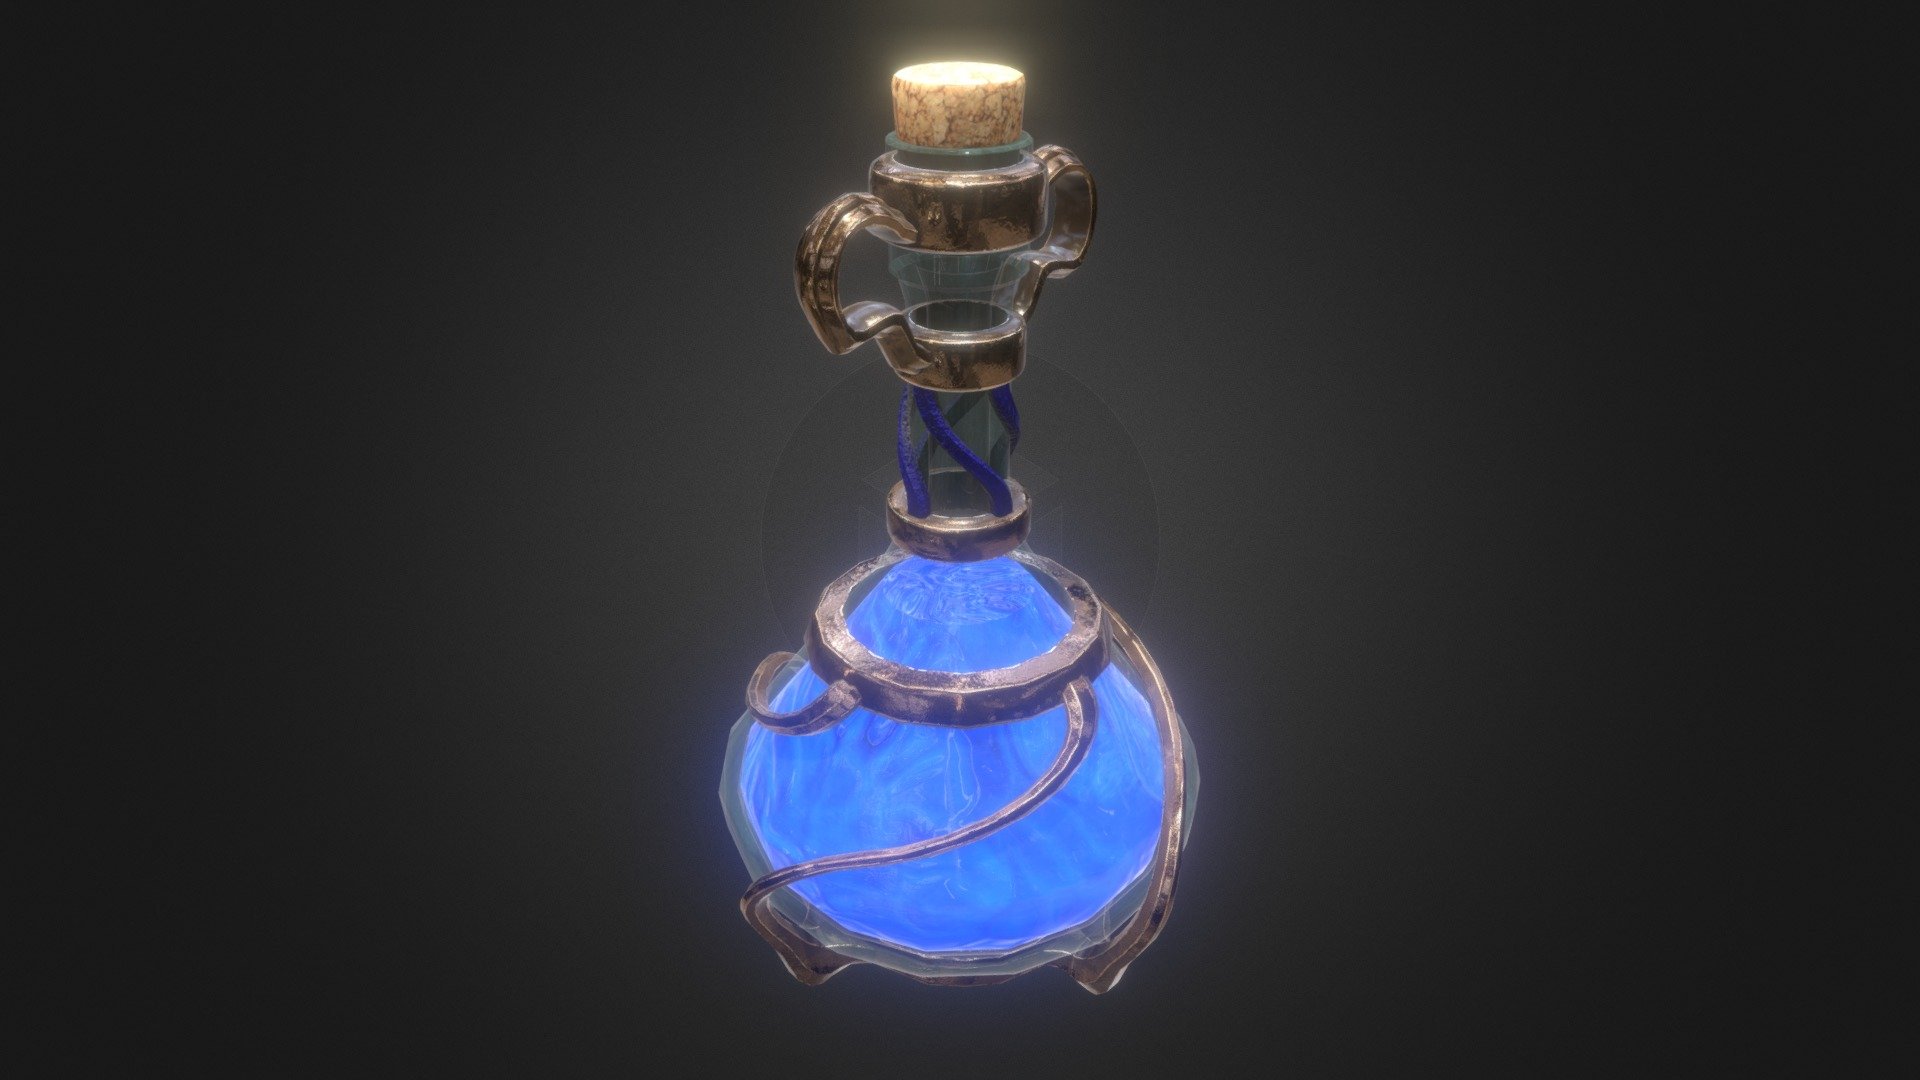 Simple potion mana elixir crate for scene or game project.
(game ready asset)

You can purchase the complete pack here.


Tris: 7.742




Texture 2k.

PBR Material.

No internal or hidden geometry.

Hand painted.

Free for use on any personal or commercial project.

If you need a personal customization please let me know in the comments.
Don't forget to check out our other uploads.

You can support our work purchasing one of our items.
Link in the bio 3d model